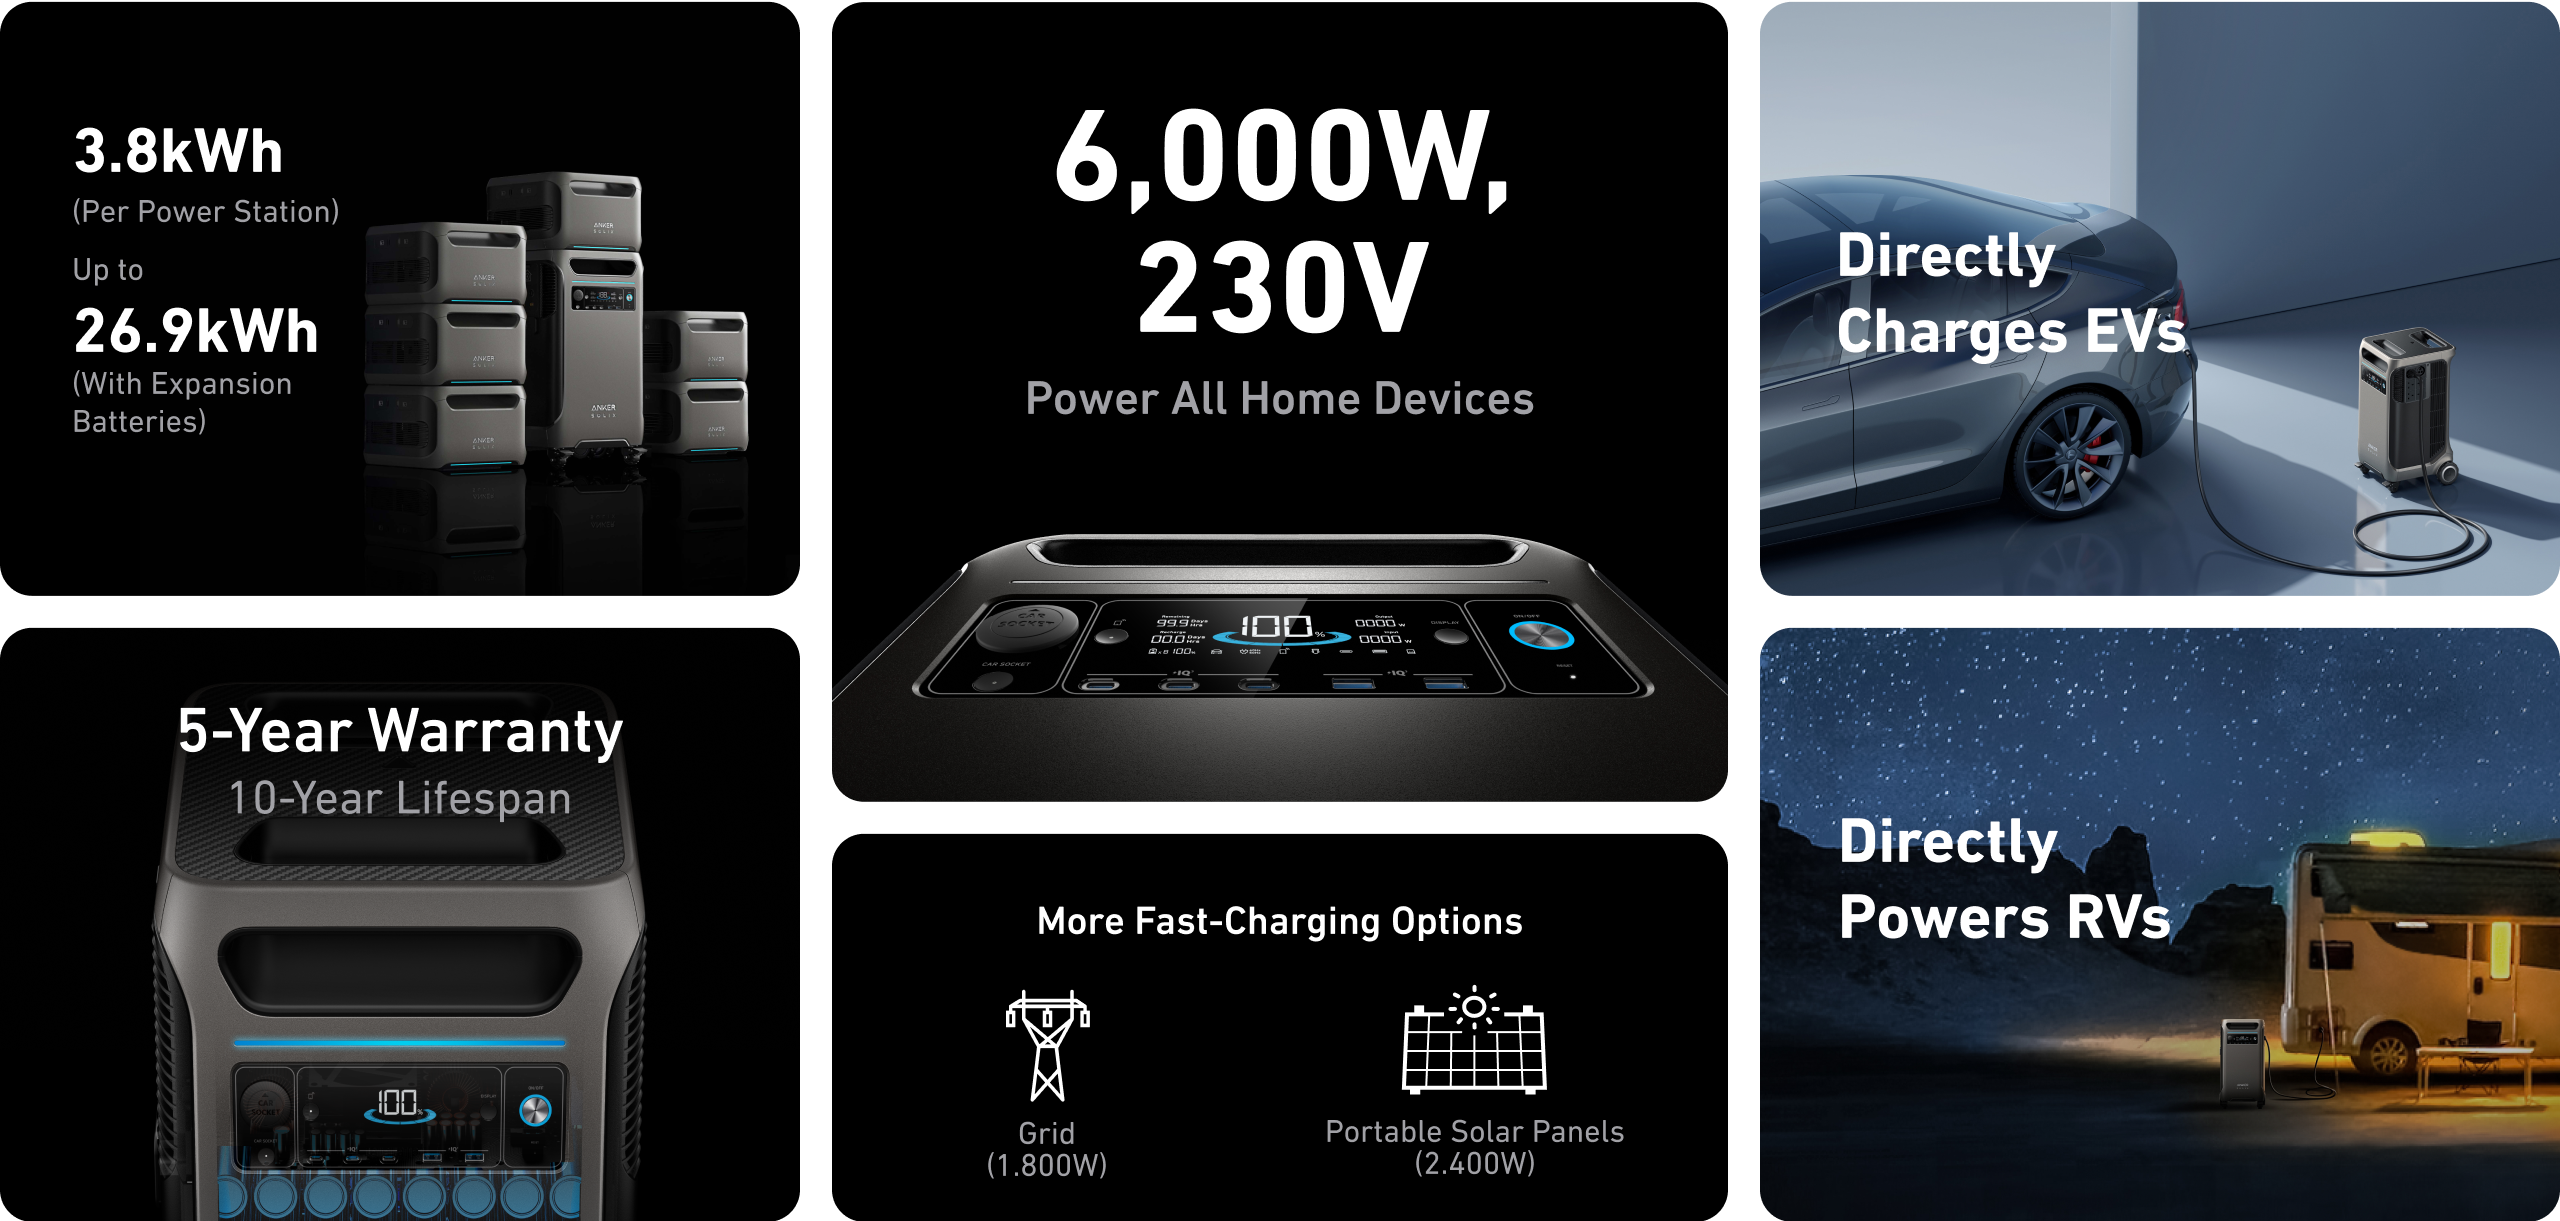 Anker Https://Www.youtube.com/Watch?V=Iyibjcwxbr8 Standard Ac Output Doubled In One Power Station With Ac Output Up To Charge Multiple Heavy-Duty Appliances Simultaneously. Including Washing Machines And Dryers. 3840Wh To 26880Wh Capacity To Meet All Your Power Needswith The Portable Power Station. You Cnn Add Up To 6 Extra Battery Packs To Expand Its Capacity Up To 26880Wh—Enough To Power Your Home For A Week.charge Your Ev In The Simplest Way No Grounding Accessories Are Needed. Ymi Can Directly Charge Your Ev At 29Wn, 3.8Kwh Of Capacity Powers A 20Km Ride. Multiple Recharge Methods And Can To 80% Within I Hour - 2400W Solar Charge To 100% In 2 Hours (Tbd) - Wall Charge To In 1,75 Hours (Tbo) Anker Solix F3800 Portable Power Station 3840Wh Anker Solix F3800 Portable Power Station 3840Wh, 6000W - A1790